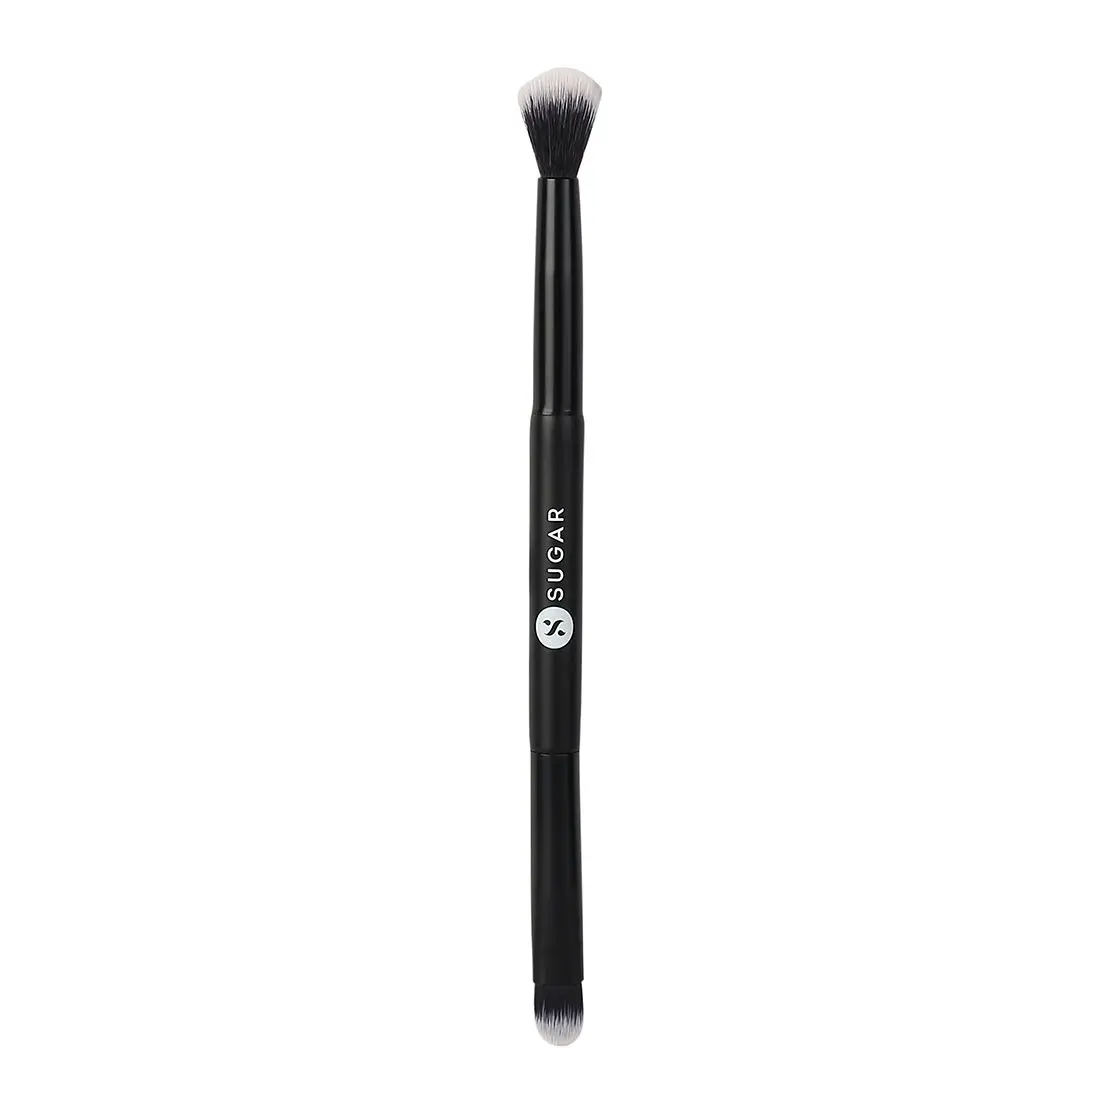 SUGAR Cosmetics - Blend Trend - 413 Flat + Round XL Dual Eyeshadow Brush (Flat and Extra Round Tip) - Synthetic Bristles and Wooden Handle